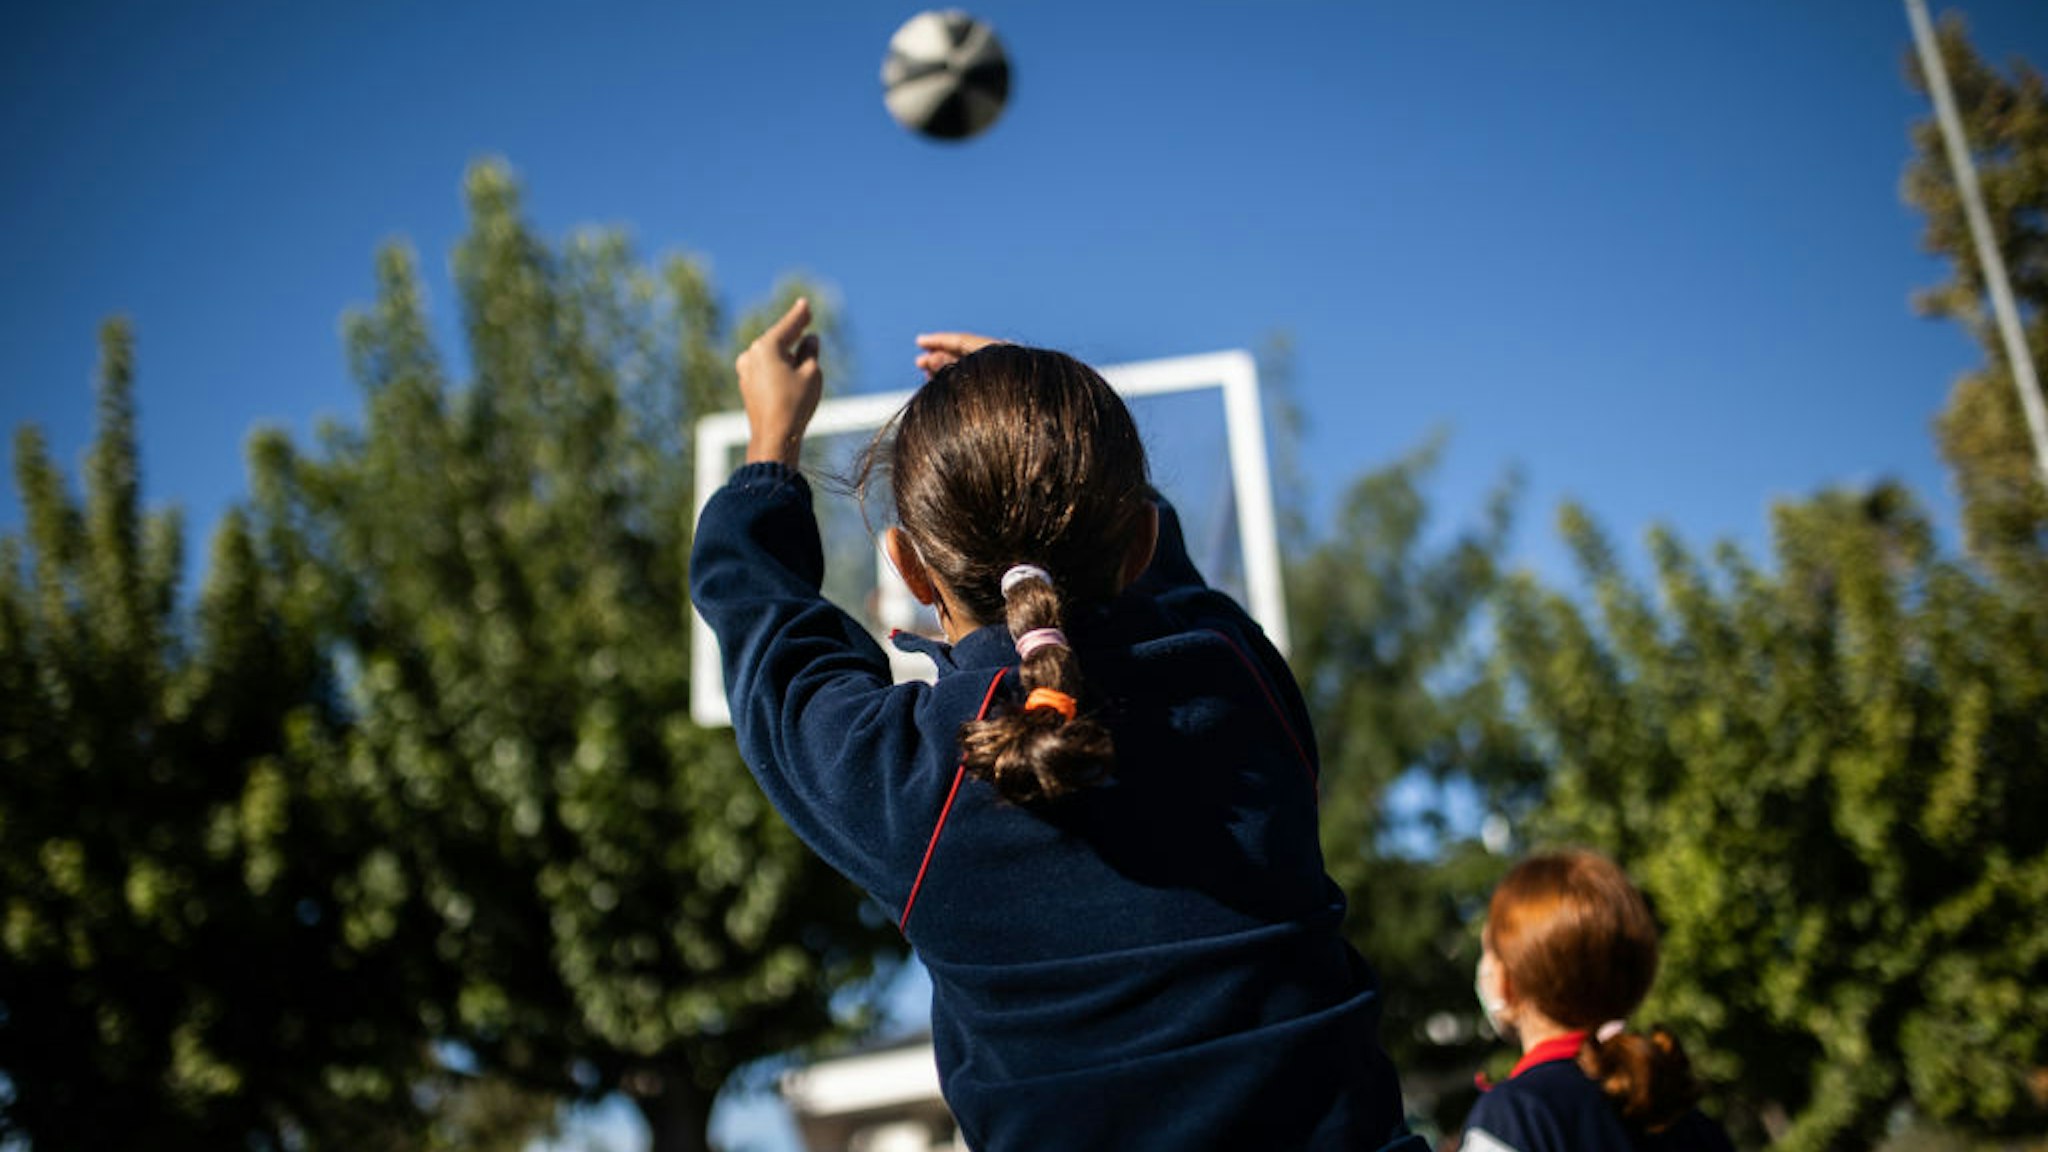 MADRID, SPAIN - OCTOBER 25: A girl plays basketball in the courtyard of the Alameda de Osuna School on the day that comes into force the measure that allows not wearing masks in school playgrounds in Madrid, on 25 October, 2021 in Madrid, Spain. With this permission, which comes into force this Monday, Madrid becomes the first autonomous community that allows not wearing masks in school playgrounds in the region, at recess and outdoors, as long as the interpersonal safety distance established by the pandemic is respected. This measure, implemented by the Community of Madrid, has been criticized by Health, who recalled that you can not unilaterally decide to remove the mask in school playgrounds as the law in force since March 29 establishes the mandatory use in outdoor spaces where it is not possible to maintain a minimum distance of 1.5 meters. (Photo By Alejandro Martinez Velez/Europa Press via Getty Images)